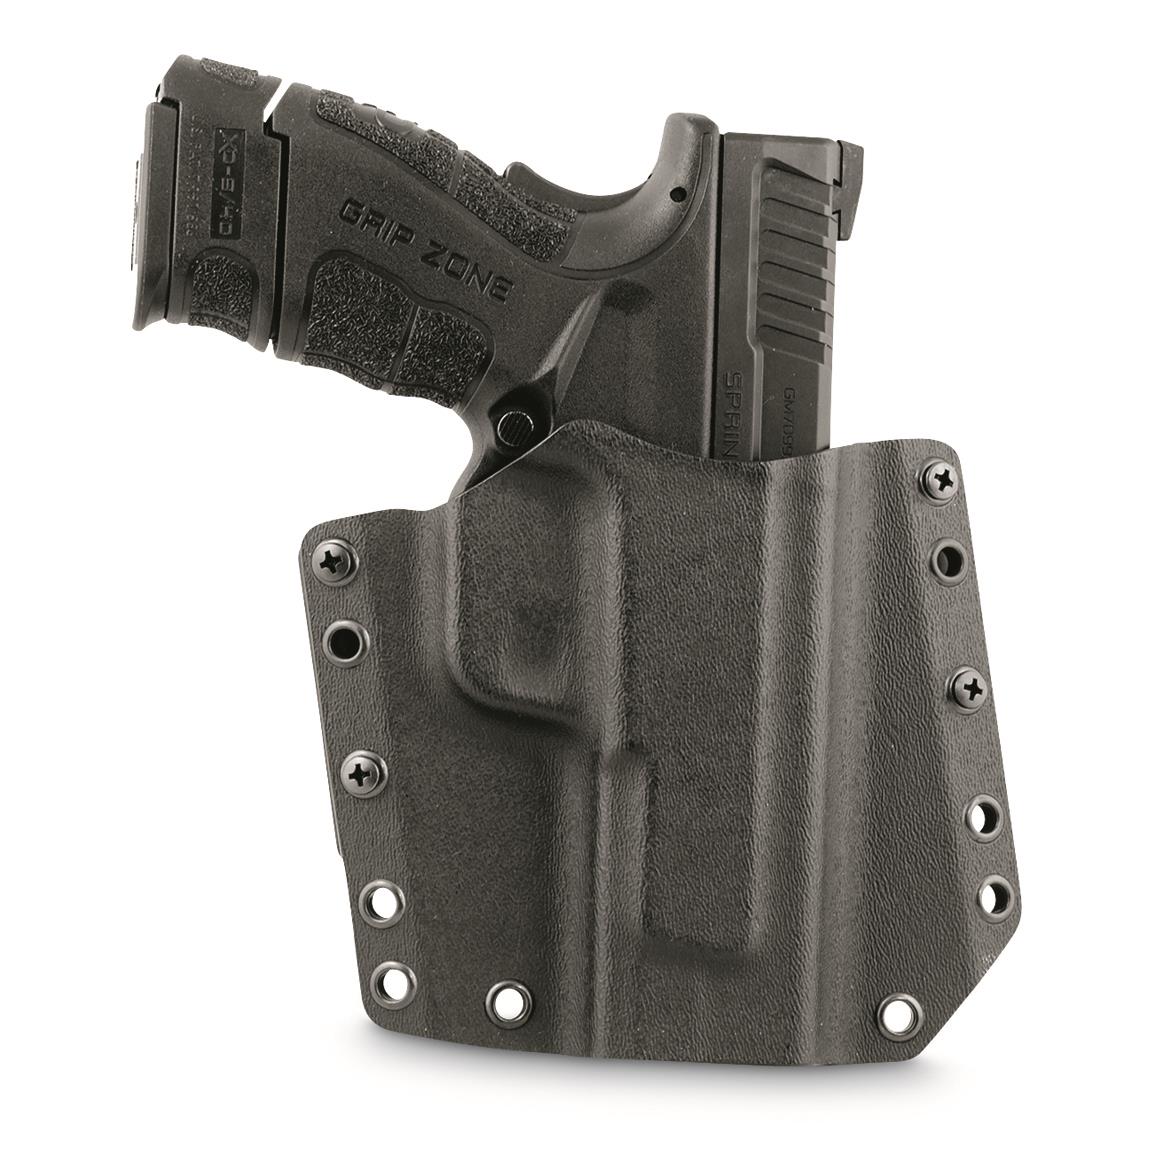 Mission First Tactical Springfield 3" XD Mod.2 9mm/.40 caliber OWB Holster